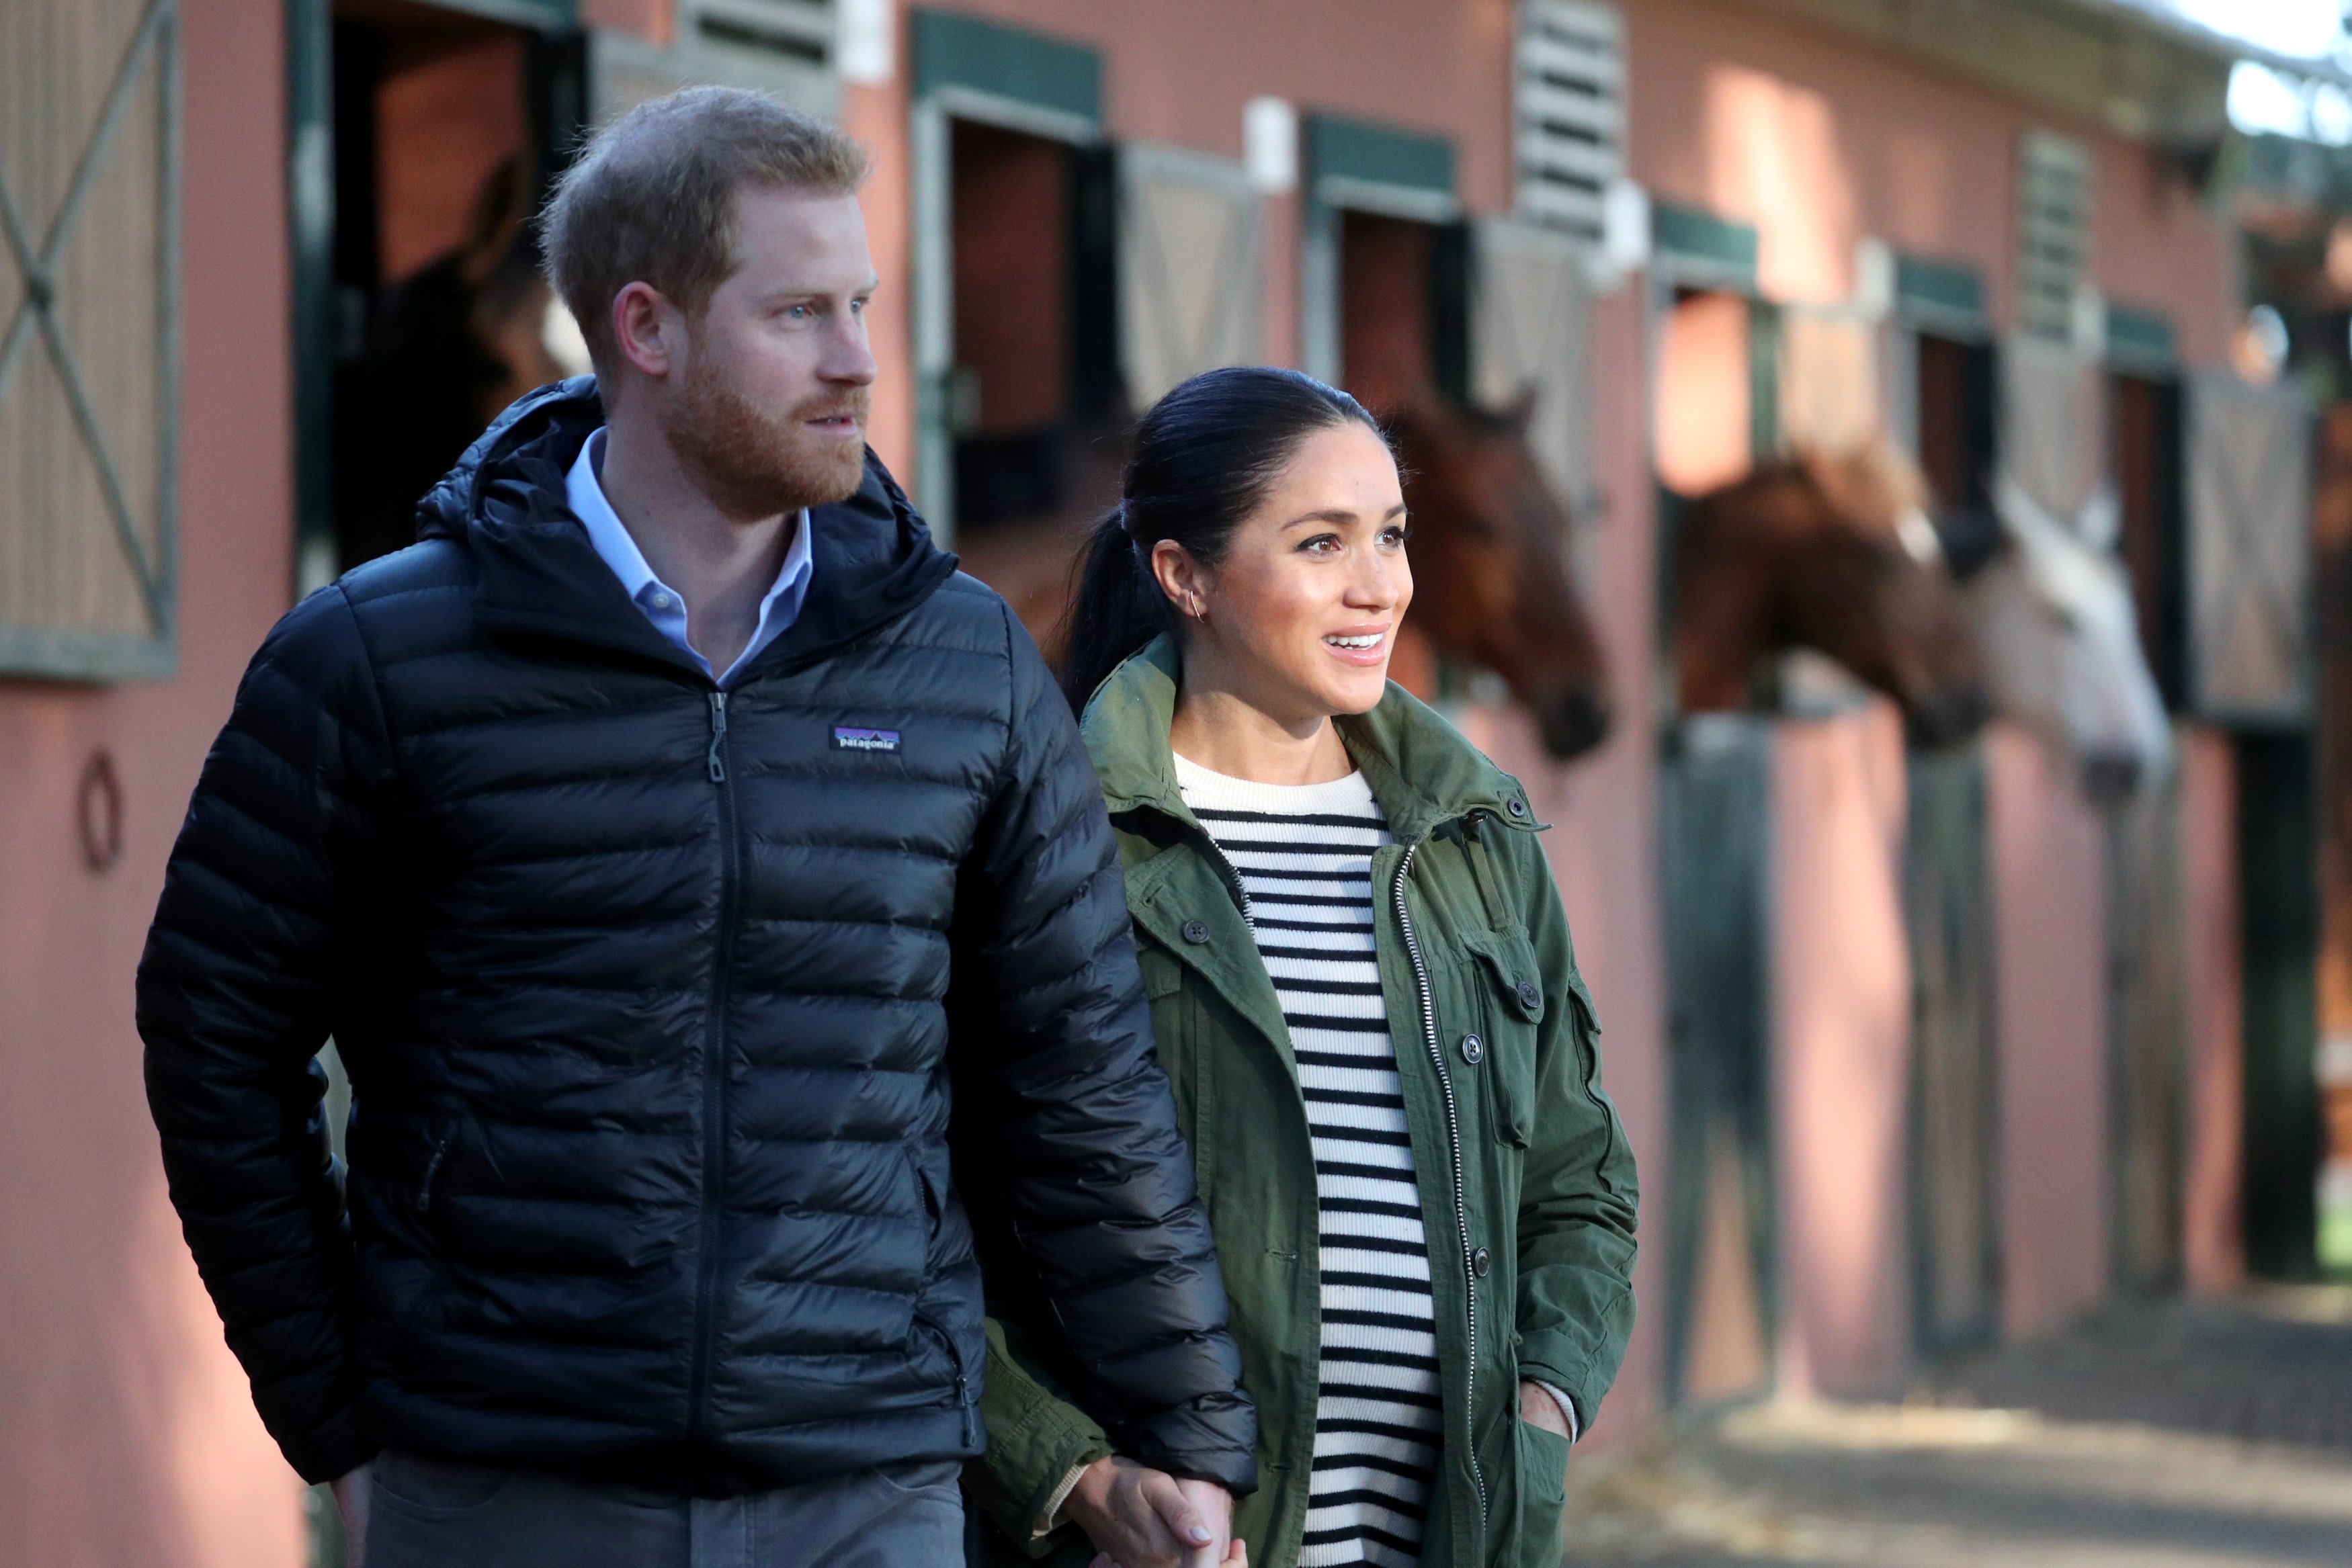 Prince Harry and Meghan Markle in Morocco 2019. | Source: Getty Images